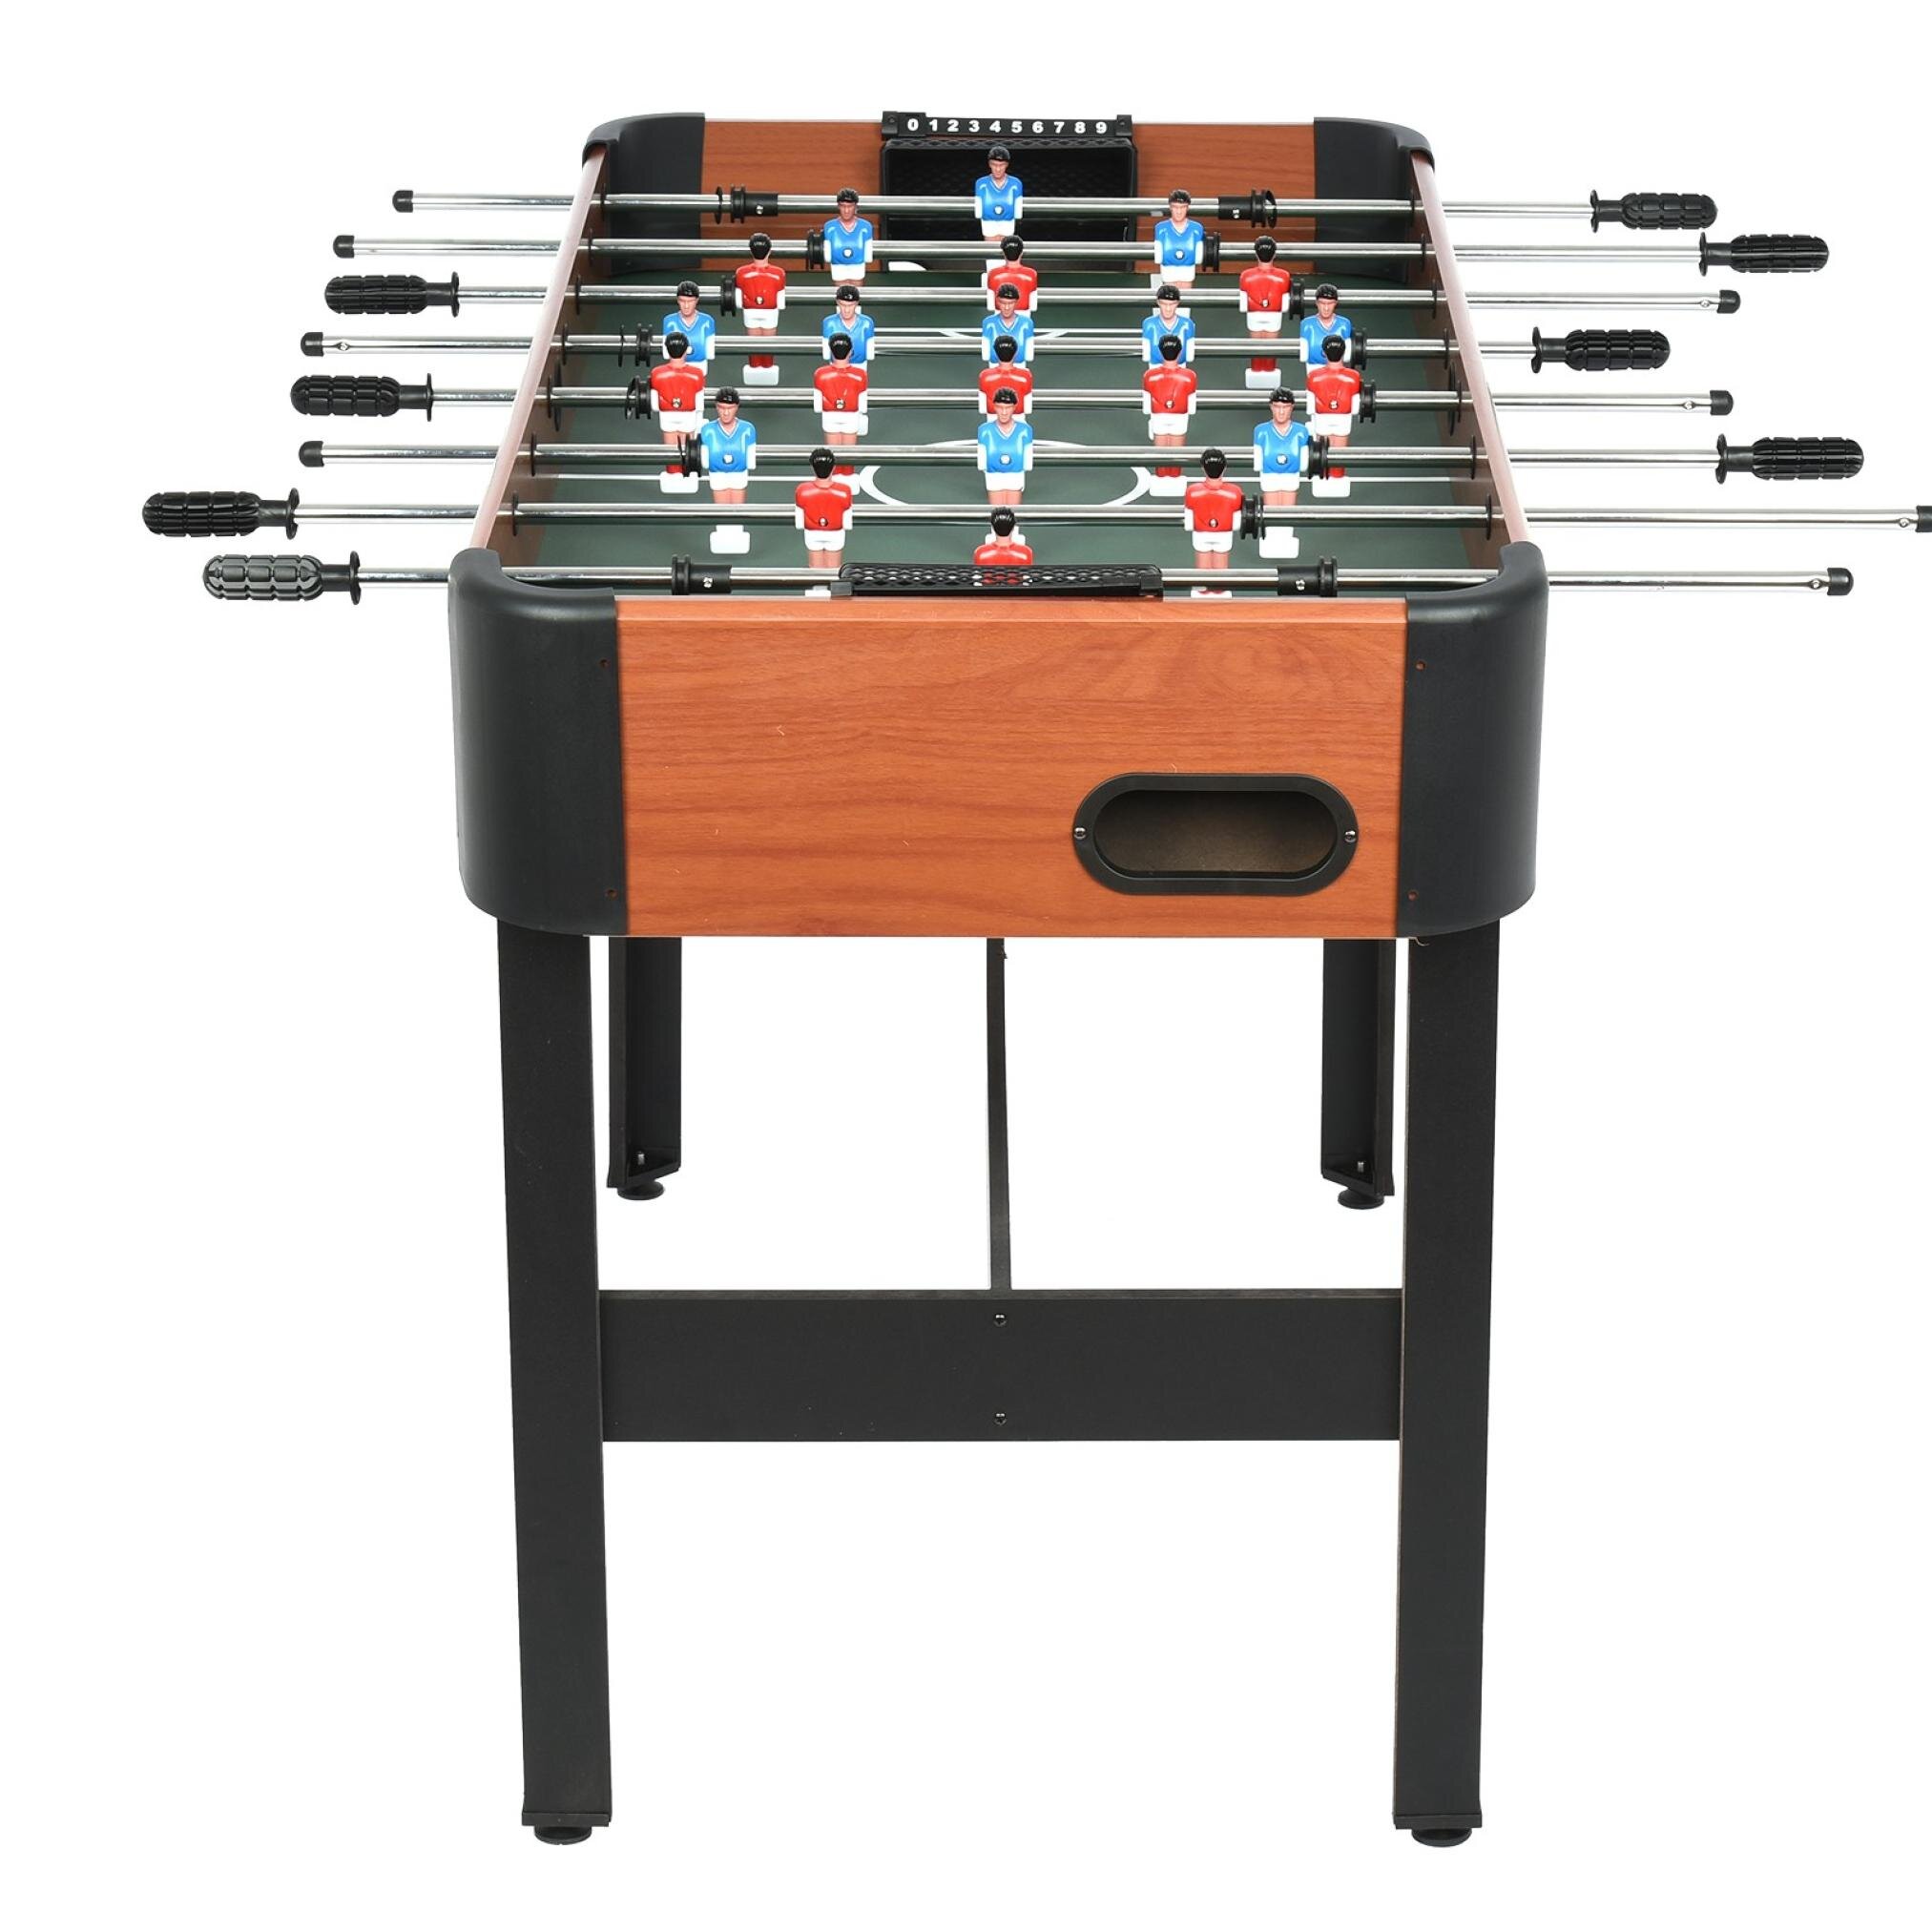 Foosball Table Multi Person Table Soccer Adults Families Recreational Foosball Games Game Rooms Easily Assemble Wooden Soccer Game Table Top w/Footballs Size:50x25x1 Recreational Foosball Games Game